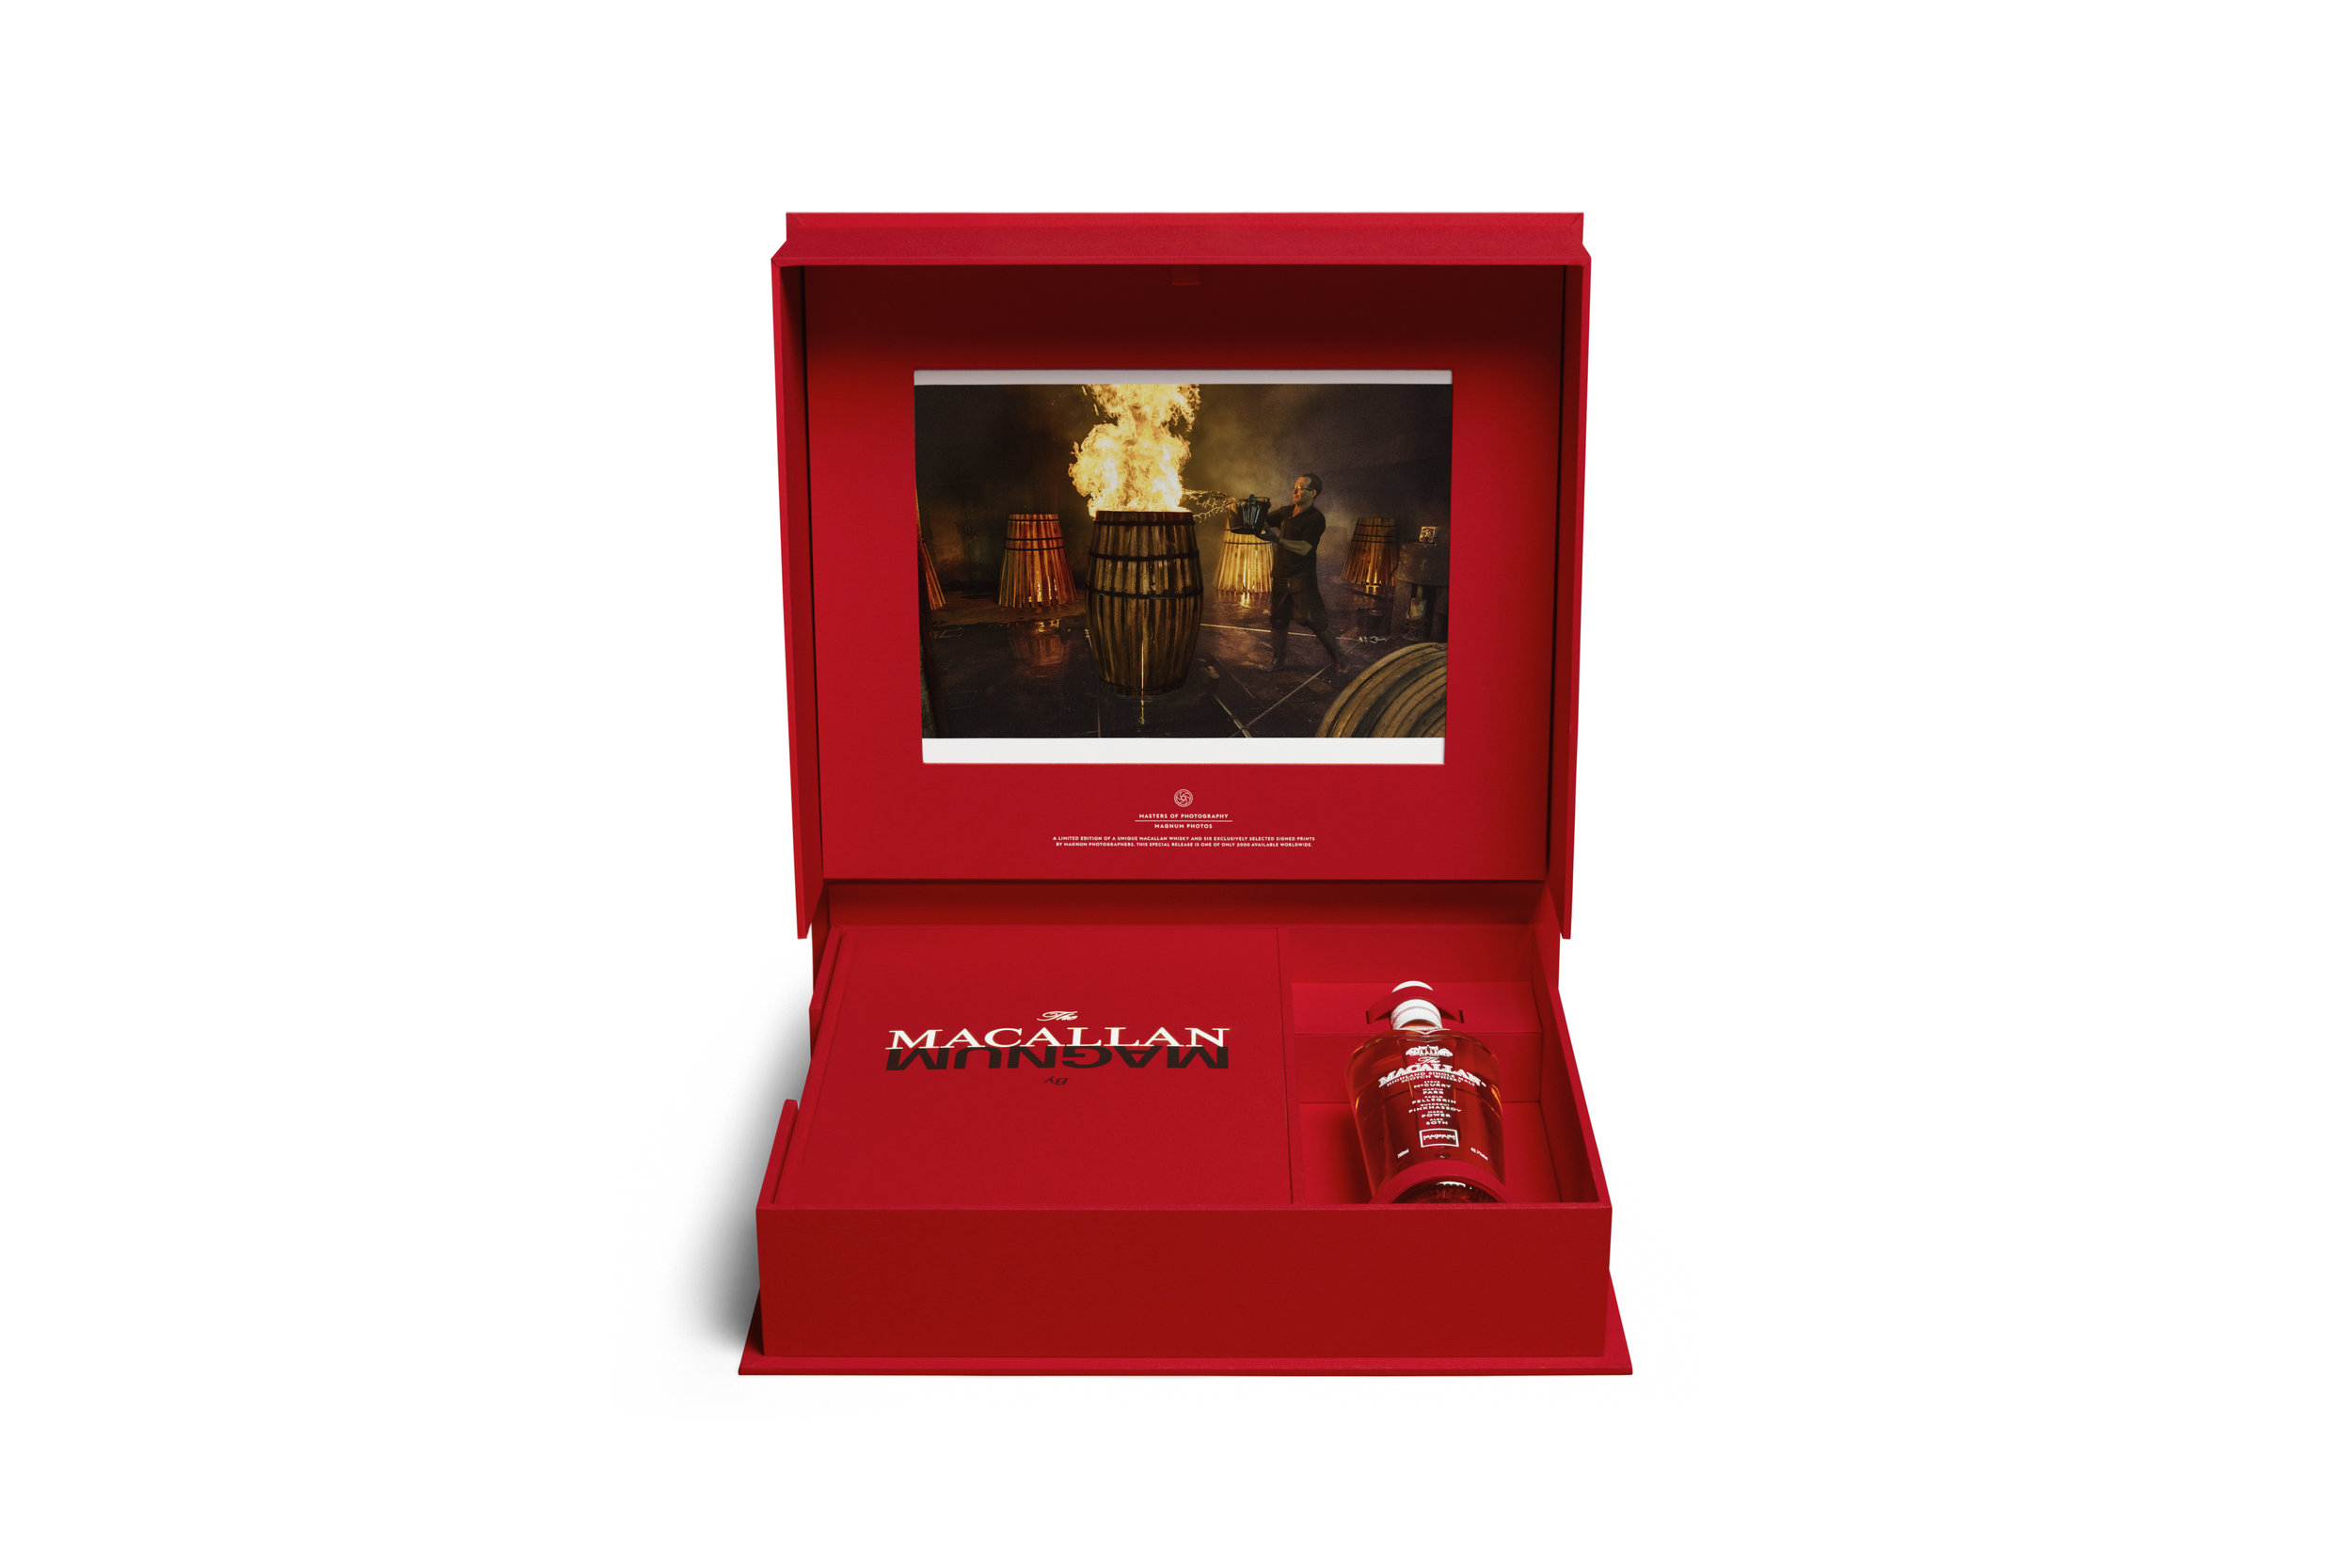 8. The Macallan Masters of Photography Magnum Edition_Gueorgui Pinkhassov.jpg